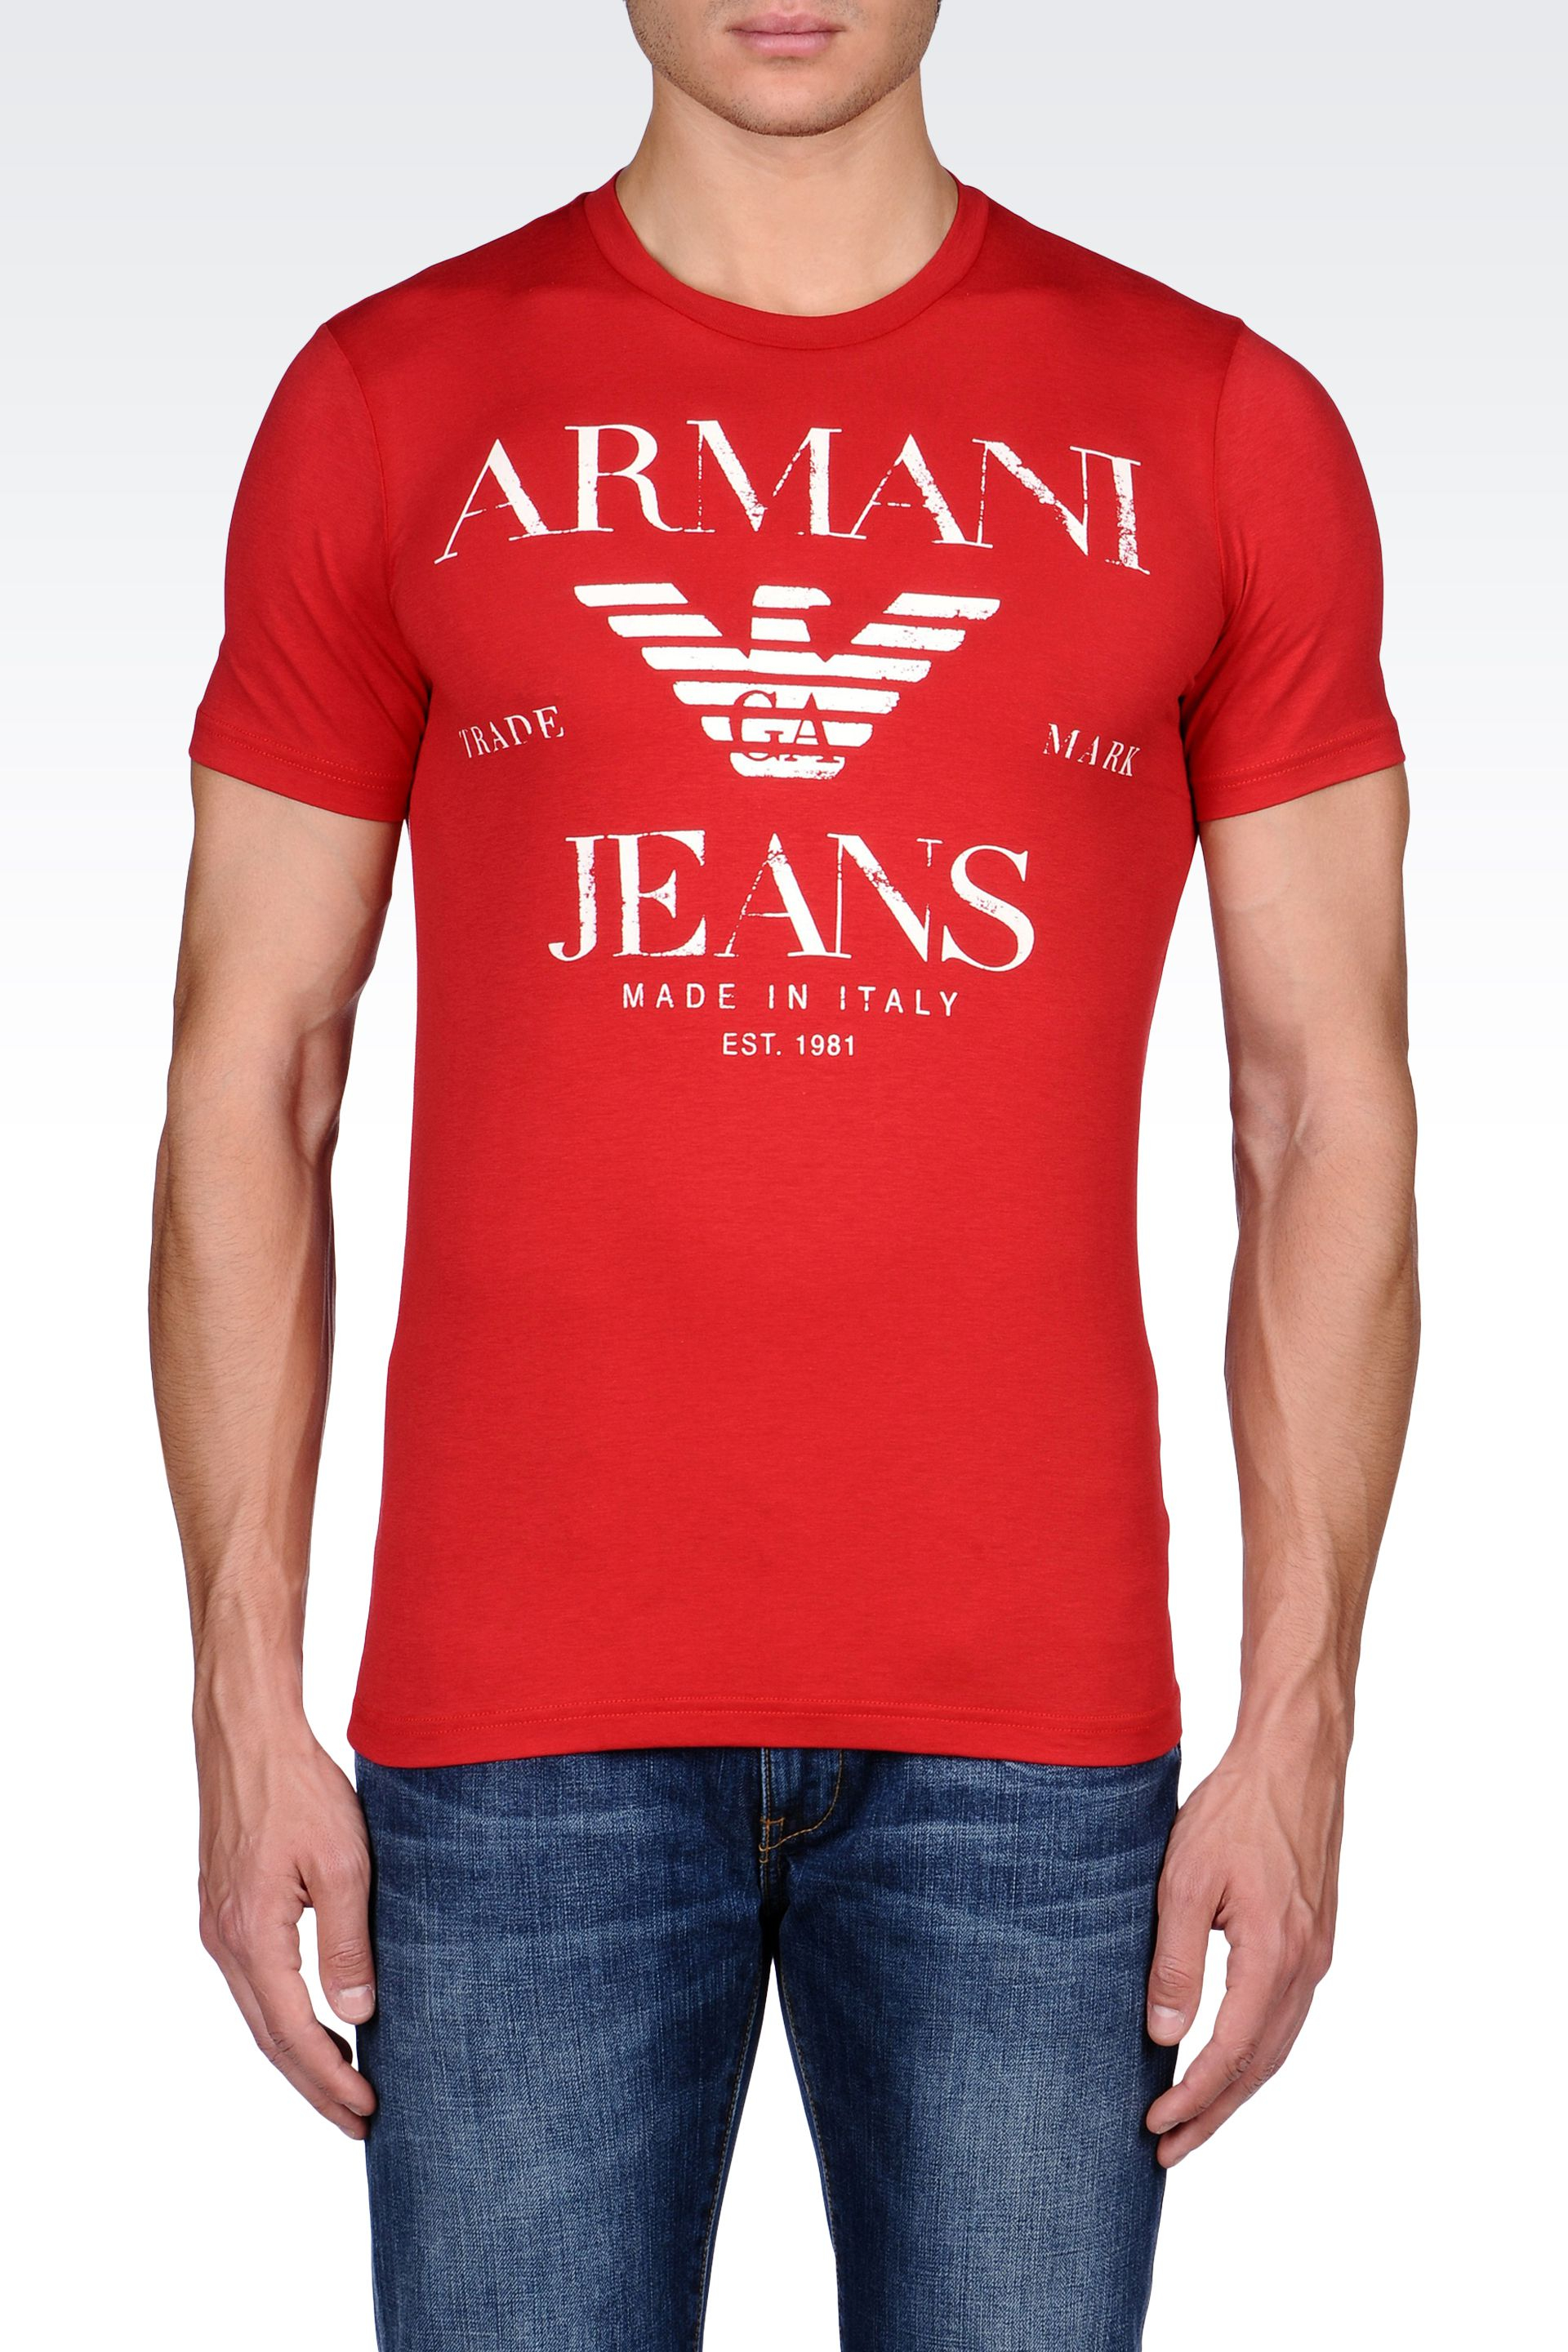 Armani T Shirt Red Factory Sale, SAVE 45% - www.rpaz.co.zw